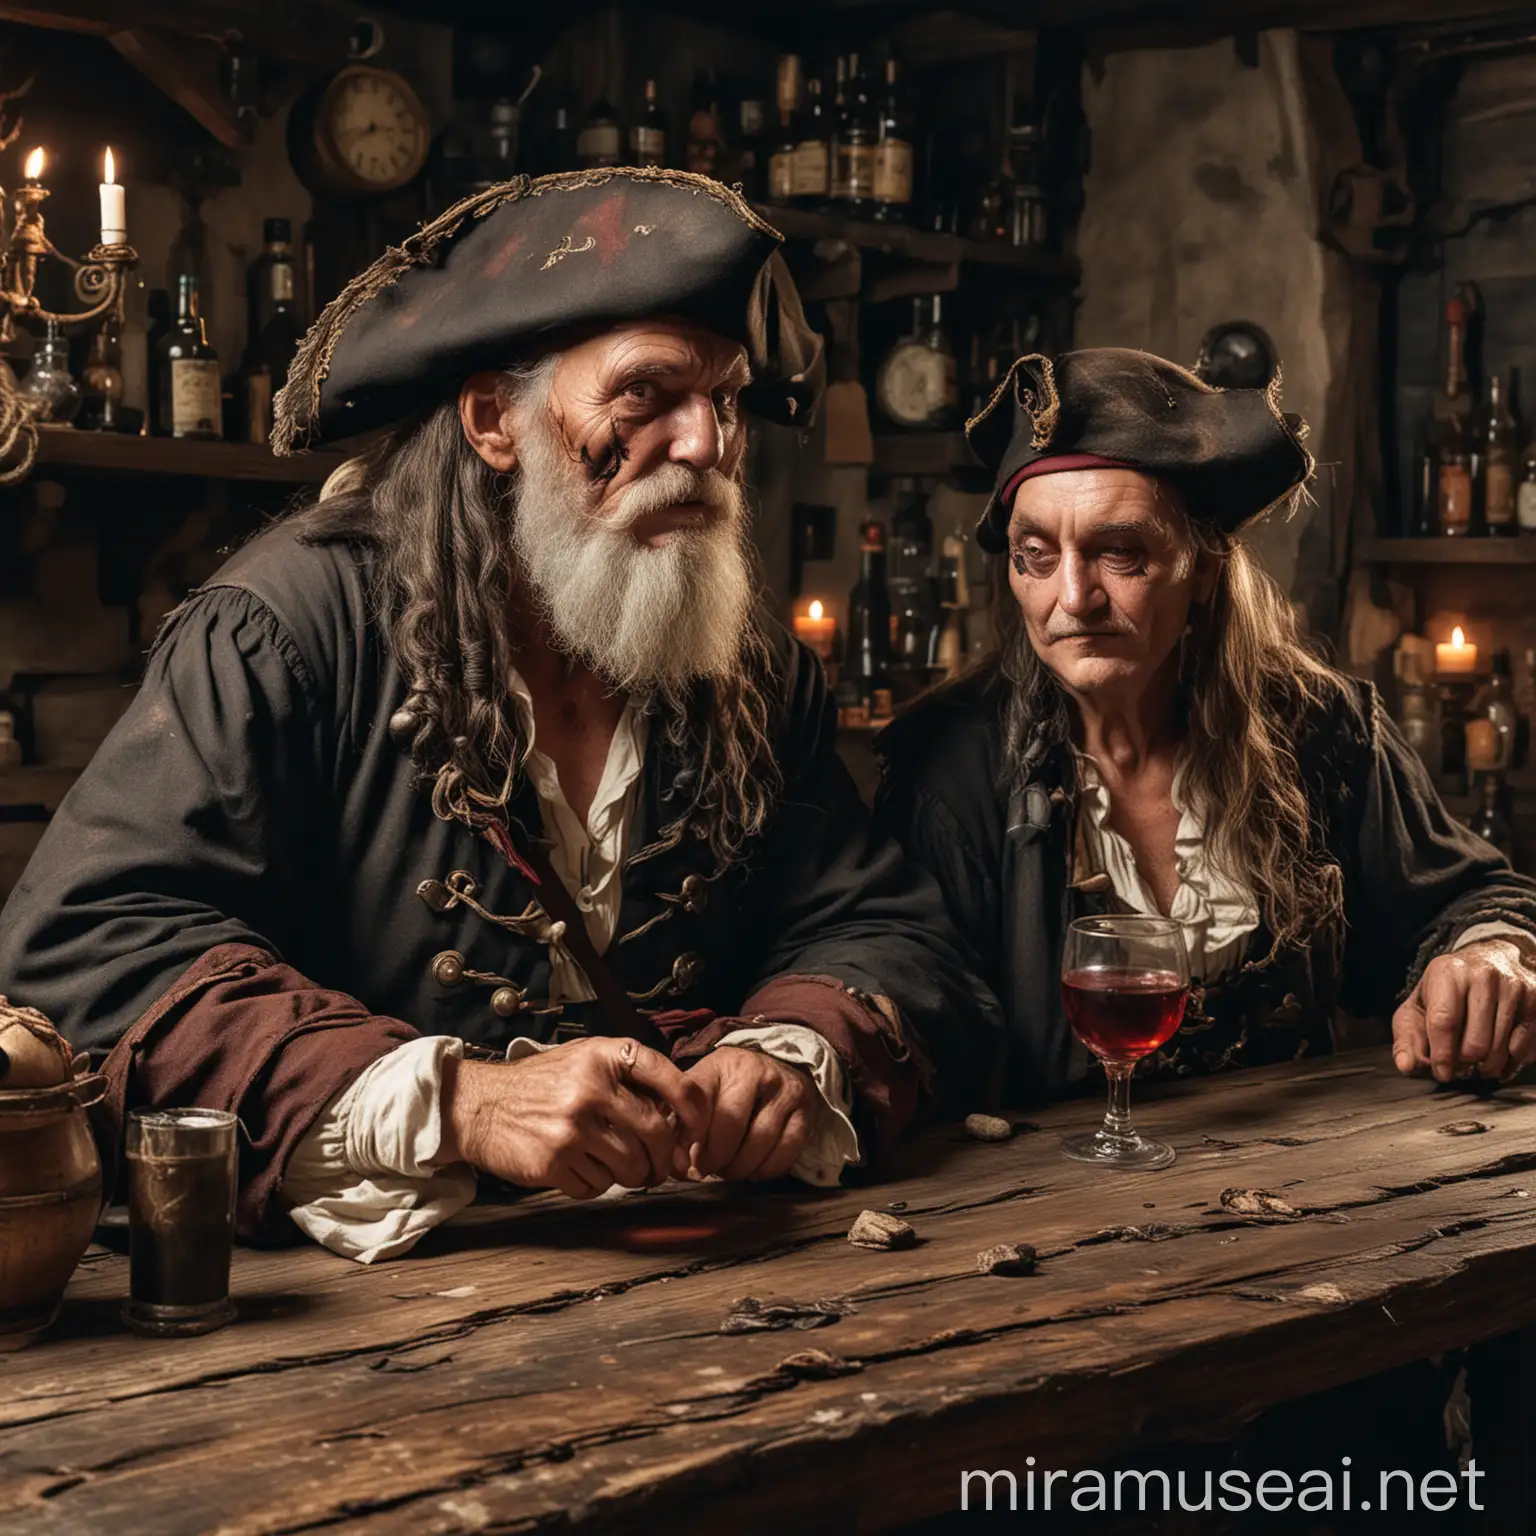 Old Pirate and Death Enjoying Wine and Rum at Taverns Counter